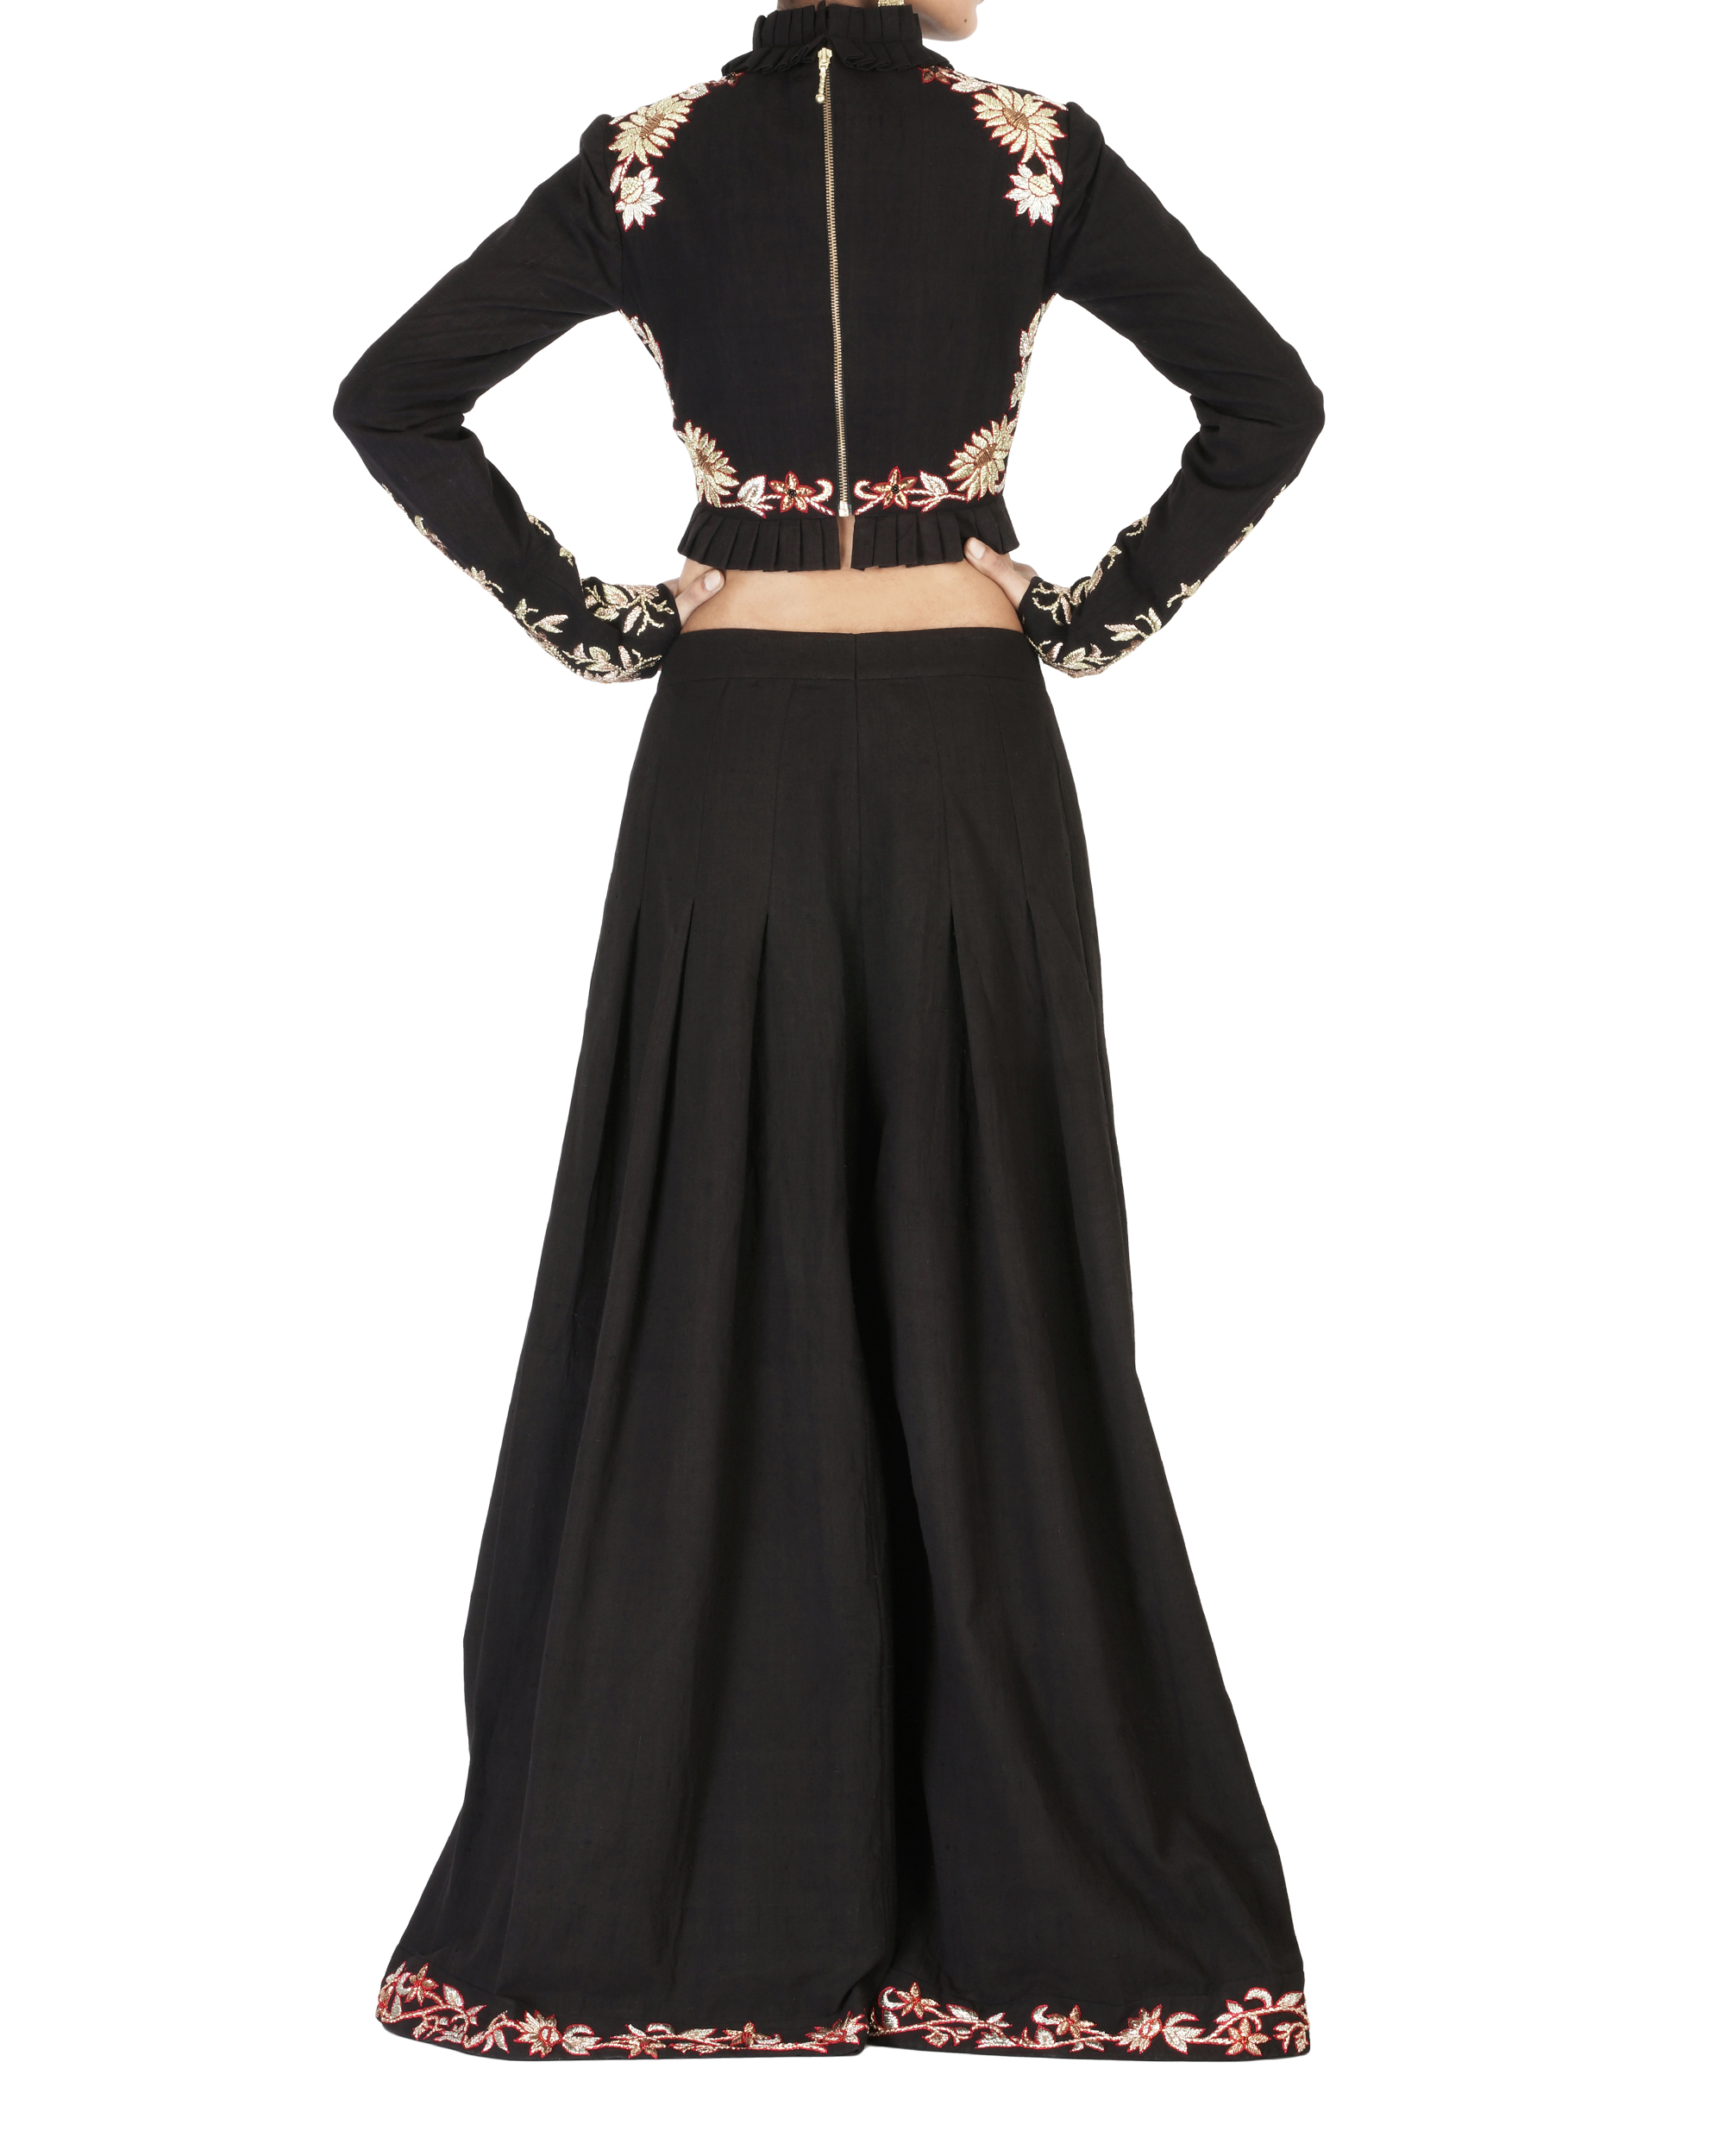 Silk Blend Embroidery Palazzo Pant Suit In Black Colour - SM4452231